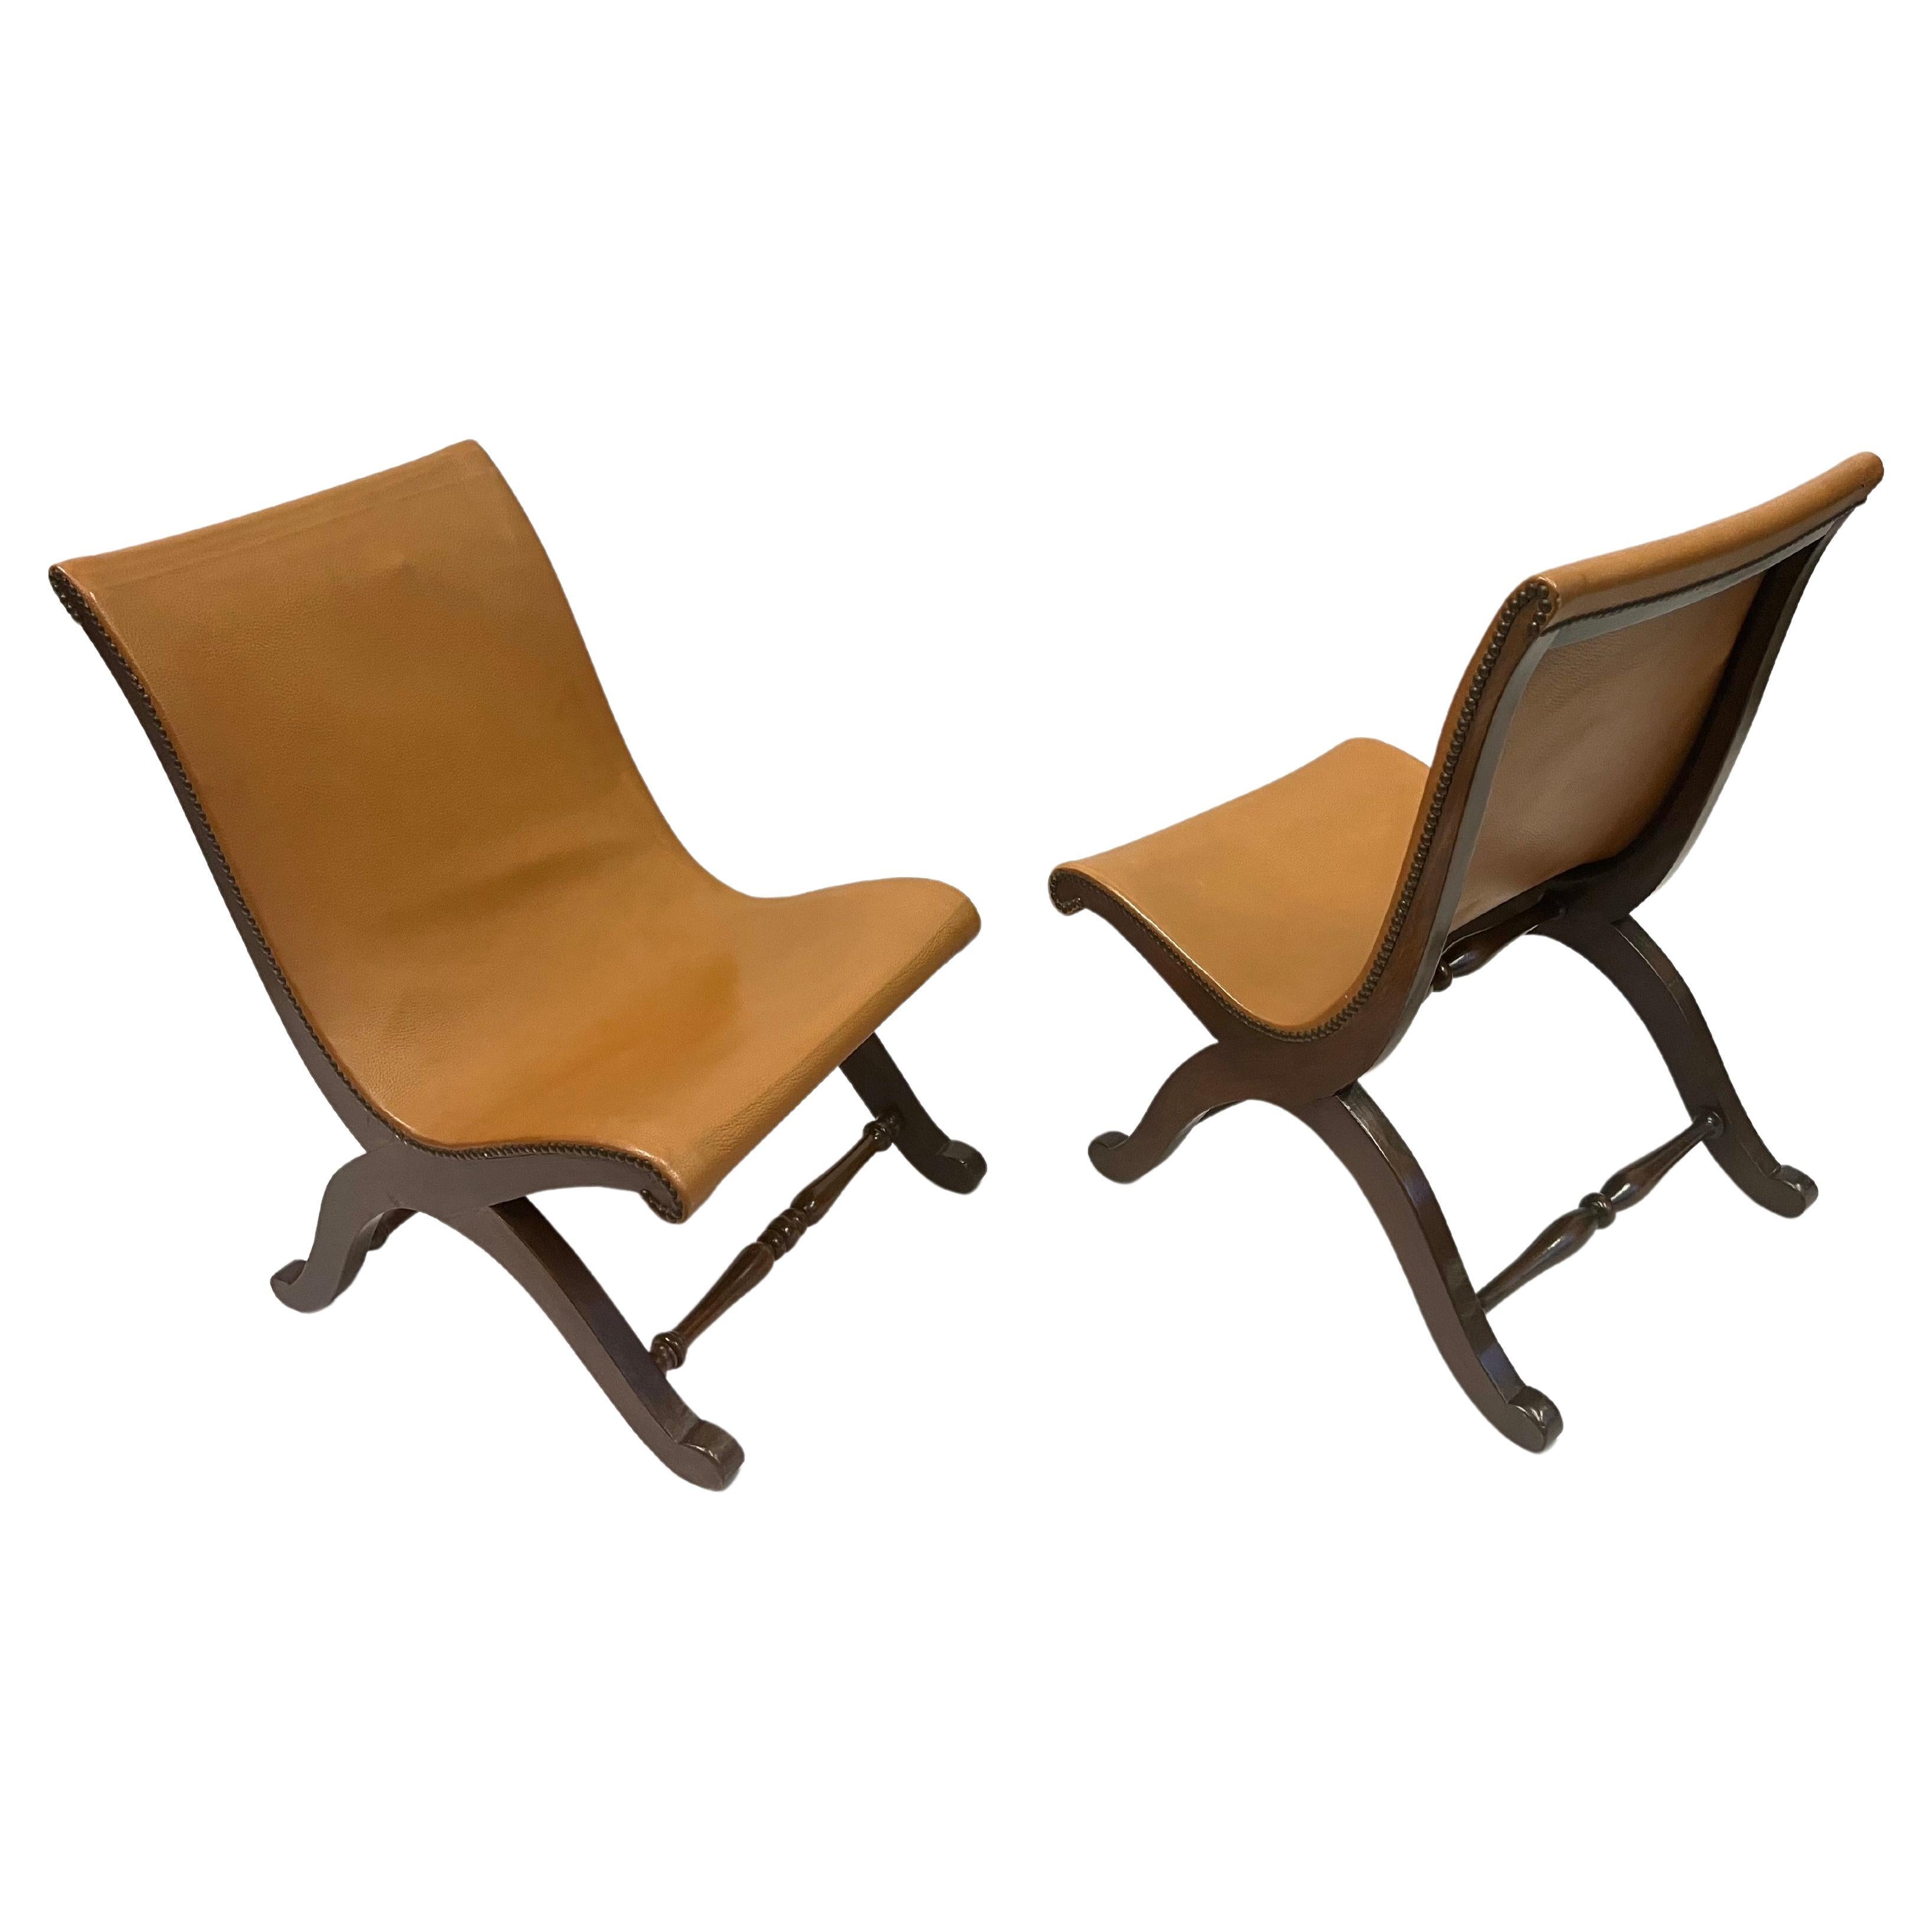 Pair of French Modern Neoclassical Leather Lounge / Slipper Chairs, Andre Arbus